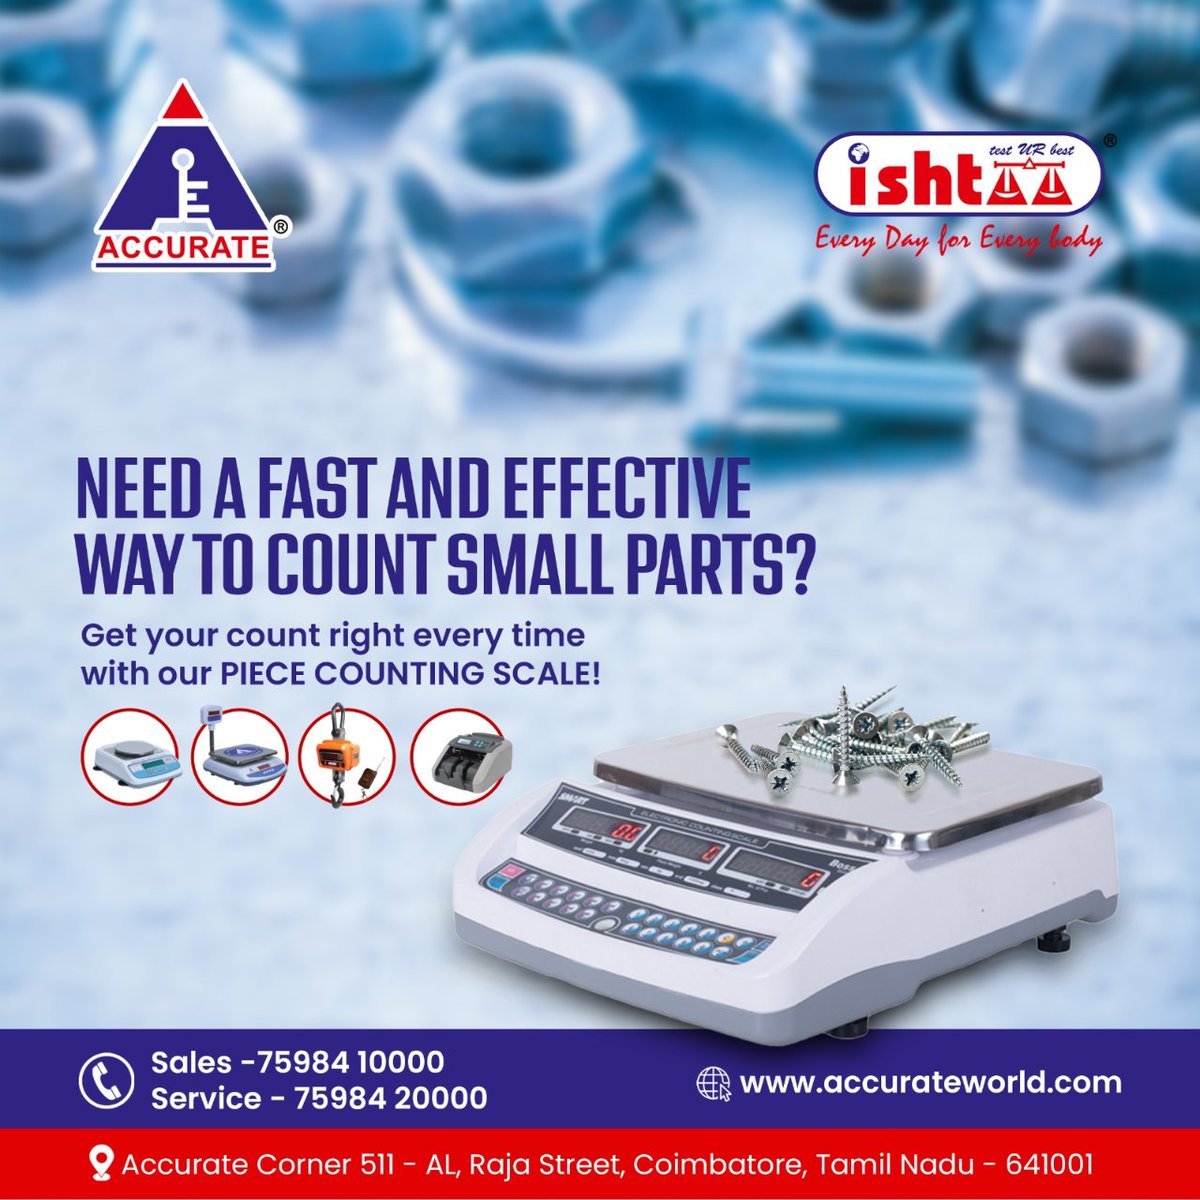 Need a Fast & Effective way to count small parts?

For More Details:
📍Accurate Corner 511 - AL, Raja St, Coimbatore, Tamil Nadu 641001
✆ 75984 10000
.
#PieceCounting #PieceCountingScale #Accurate #AccurateElectronics #WeighingScale #WeightScale #FieldScale #IndustrialScale